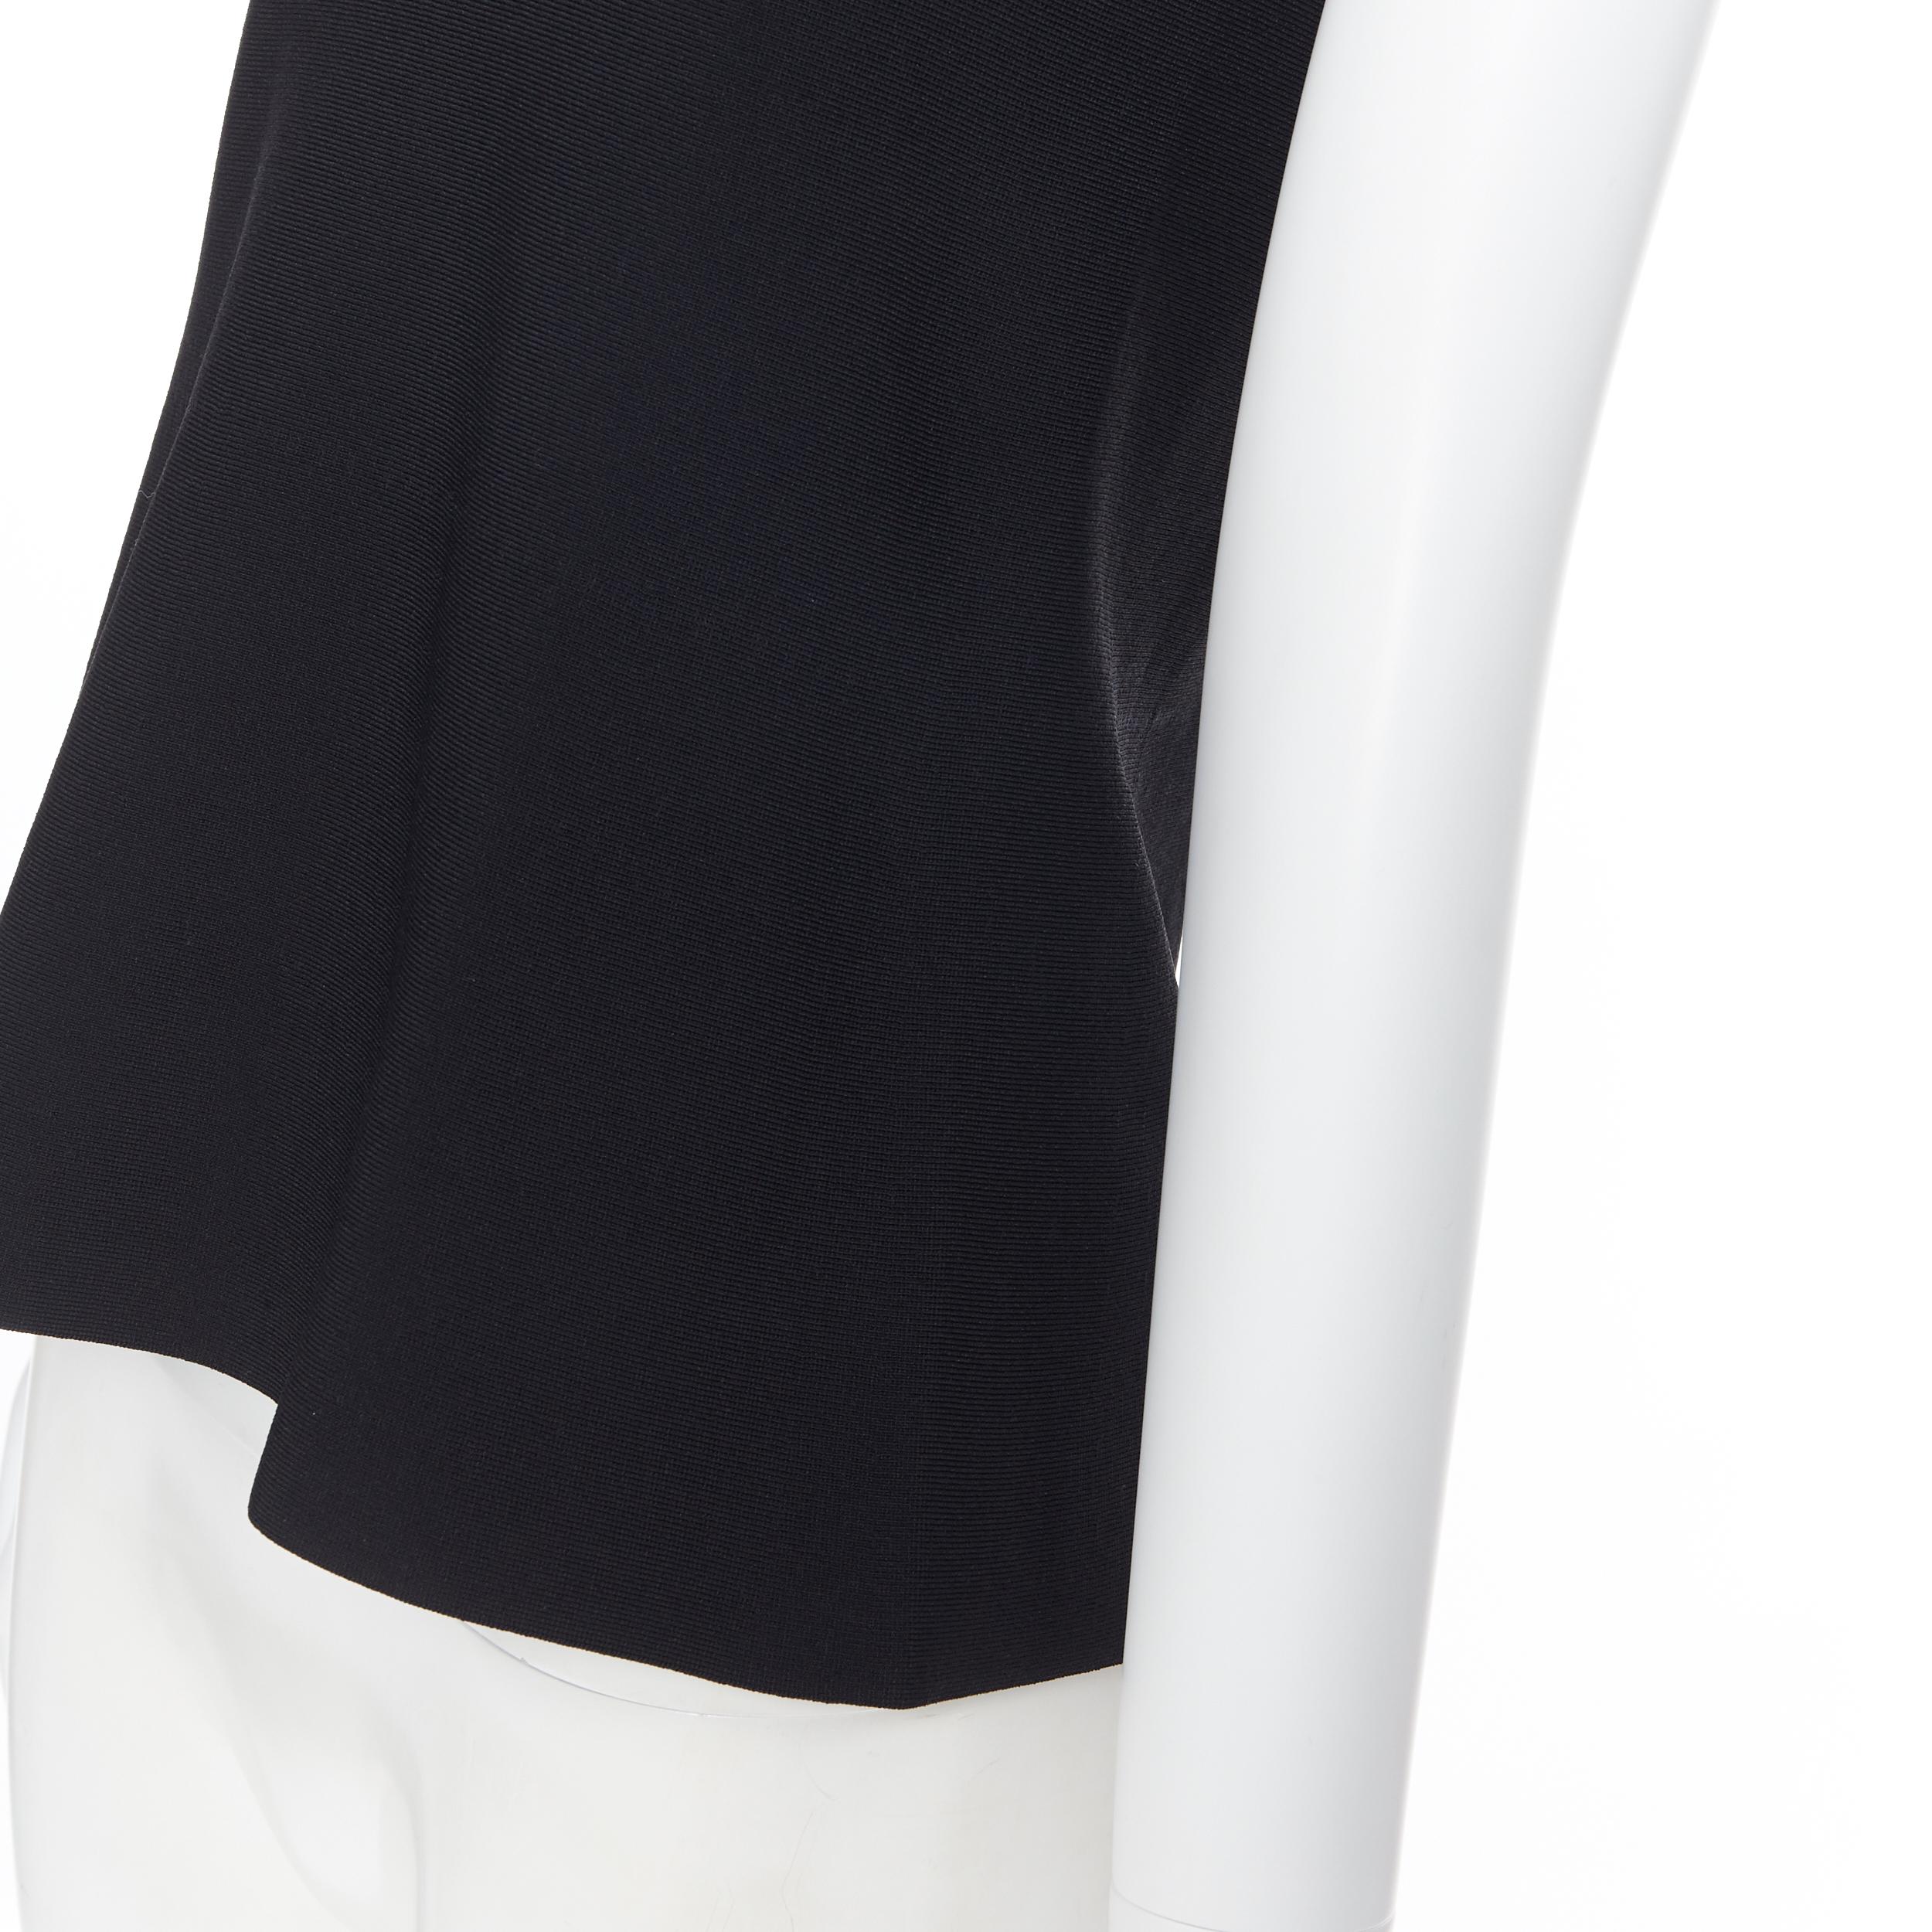 NARCISO RODRIGUEZ black viscose knit stretchy sleeveless top IT38
Brand: Narciso Rodriguez
Designer: Narciso Rodriguez
Model Name / Style: Stretch top
Material: Viscose blend
Color: Black
Pattern: Solid
Extra Detail: Stretch fit.  Sleeveless. Round